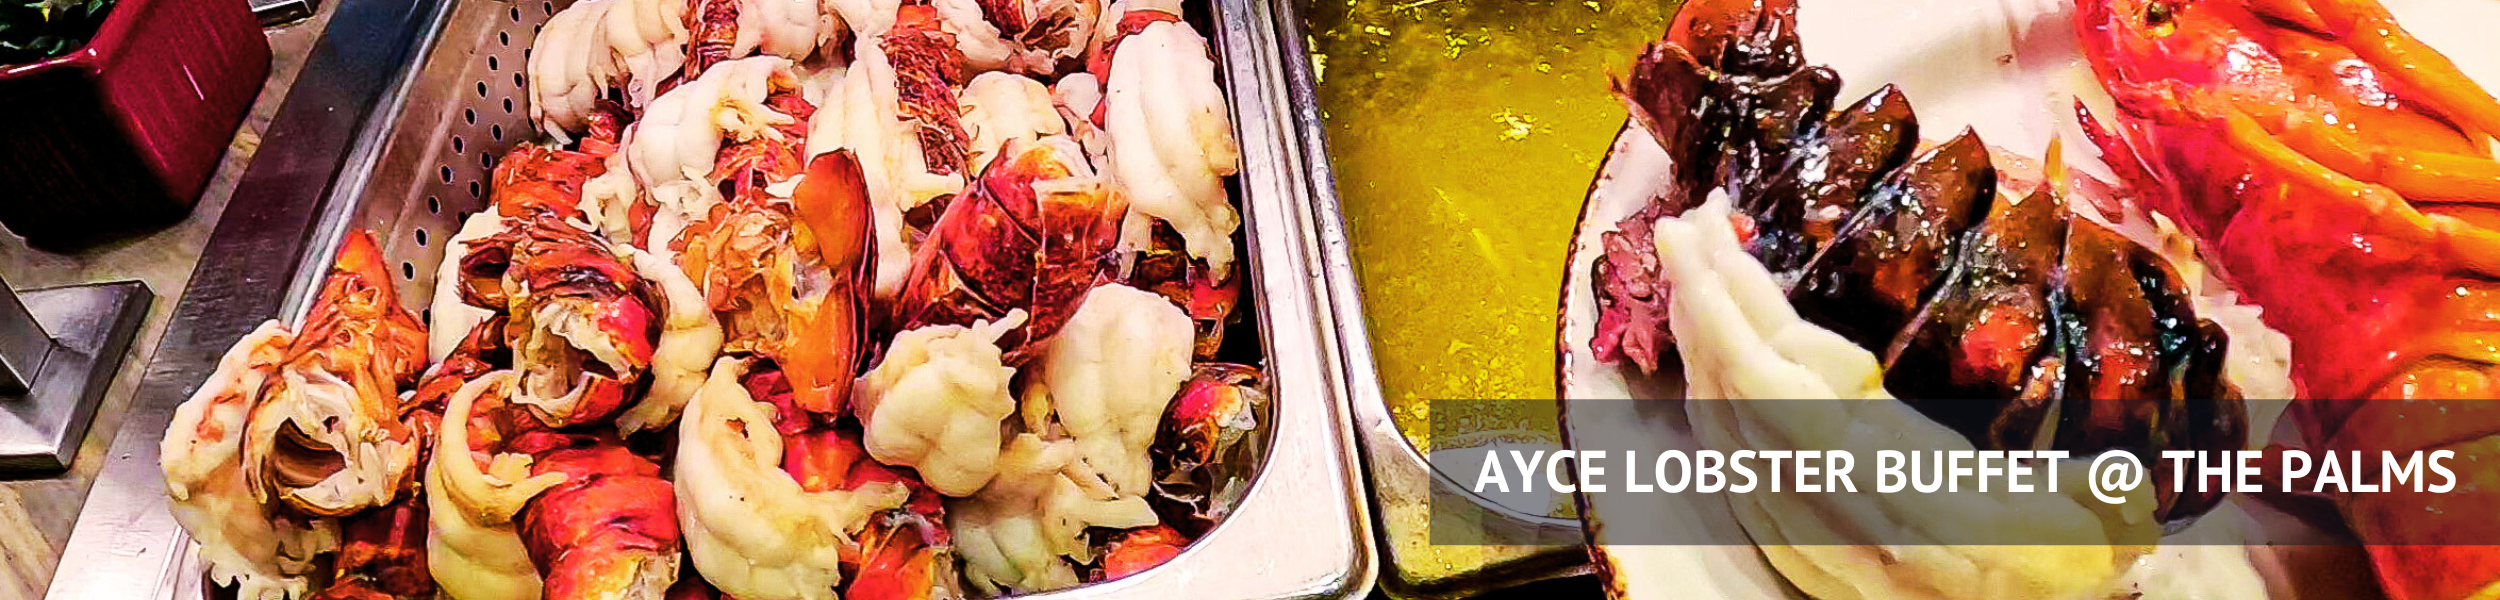 AYCE Lobster Buffet Review at the Palms